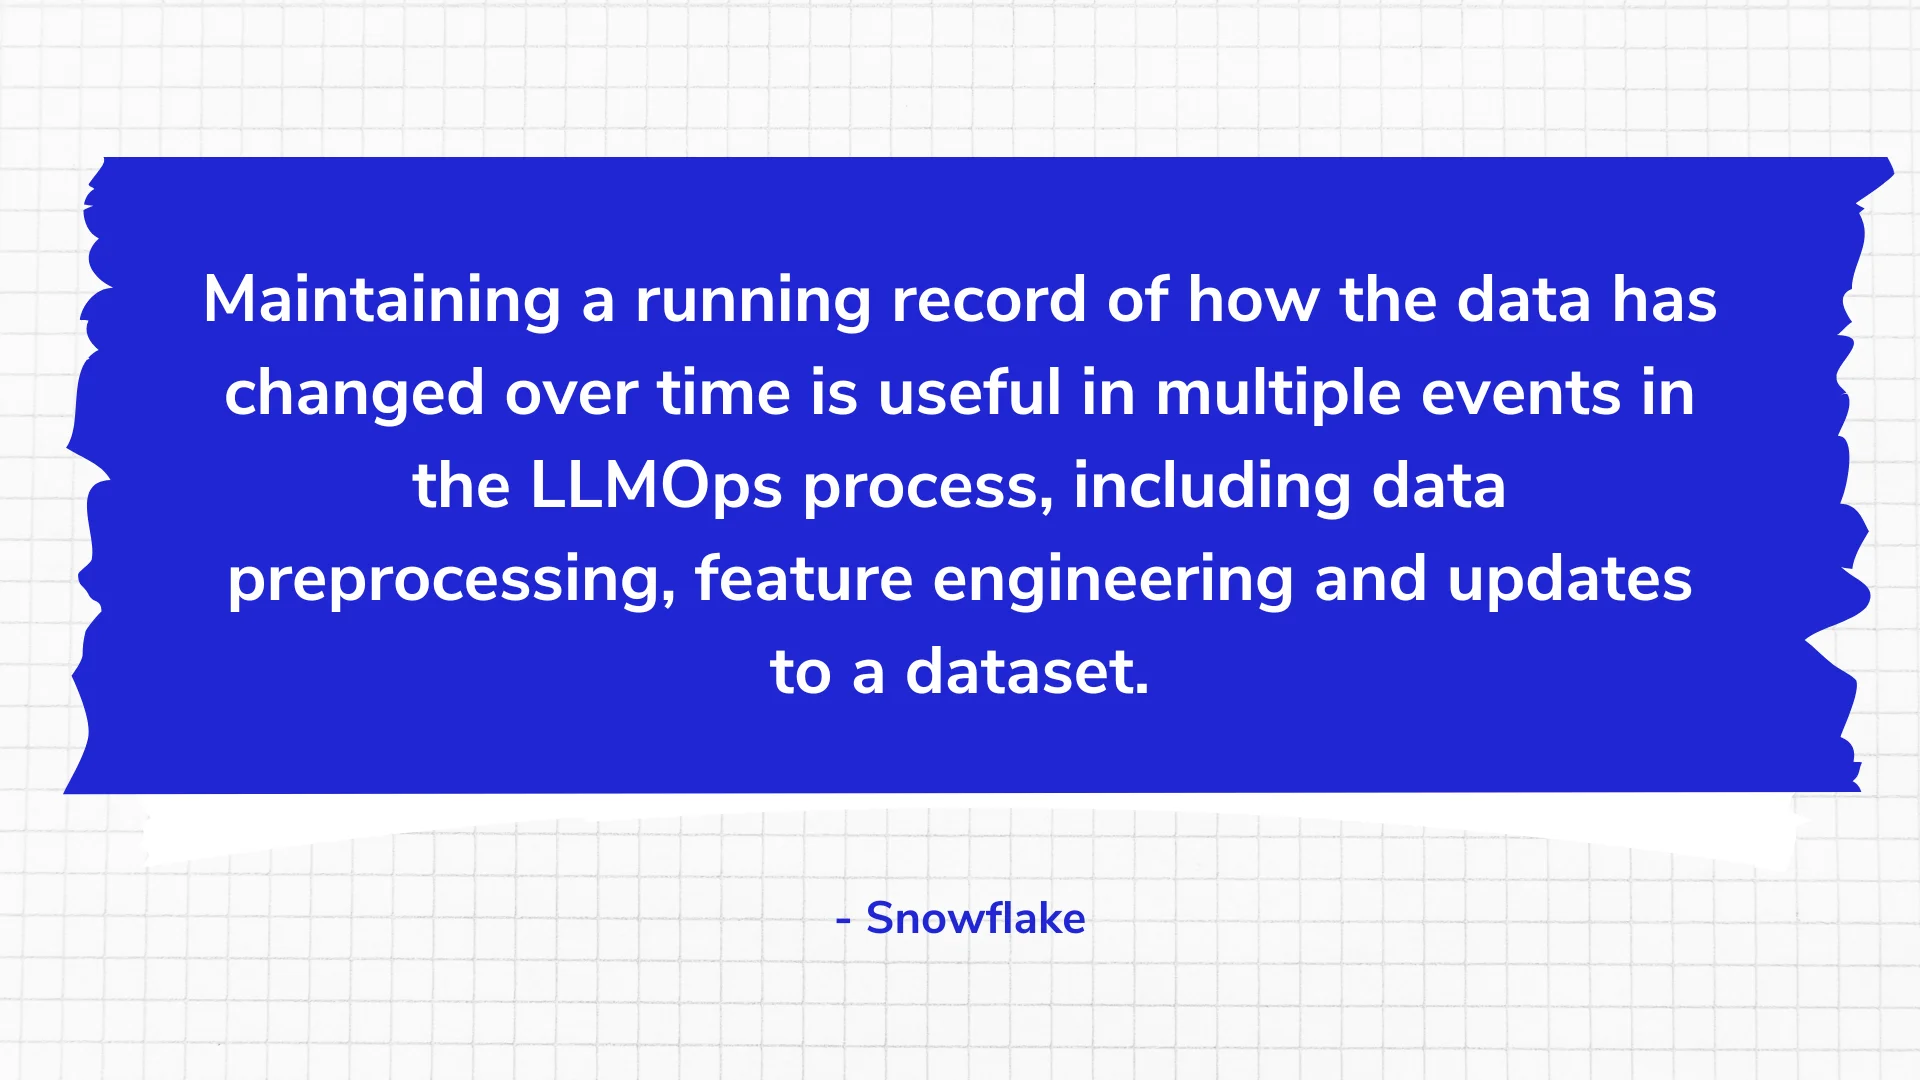 Maintaining a running record of how the data has changed over time is useful in multiple events in the LLMOps process, including data preprocessing, feature engineering and updates to a dataset